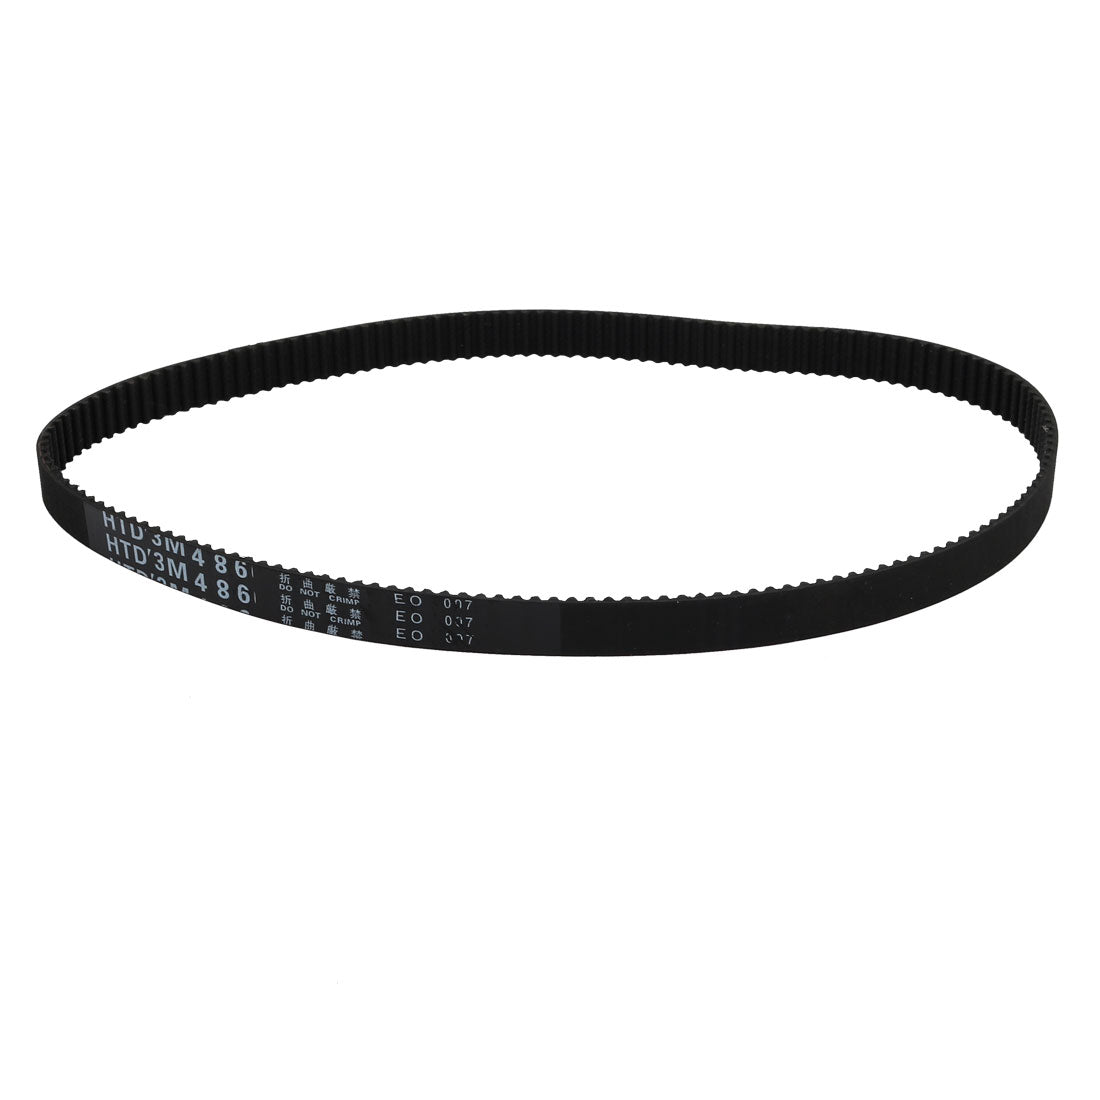 uxcell Uxcell HTD3M486 Rubber Timing Belt Synchronous Closed Loop Timing Belt Pulleys 10MM Wide